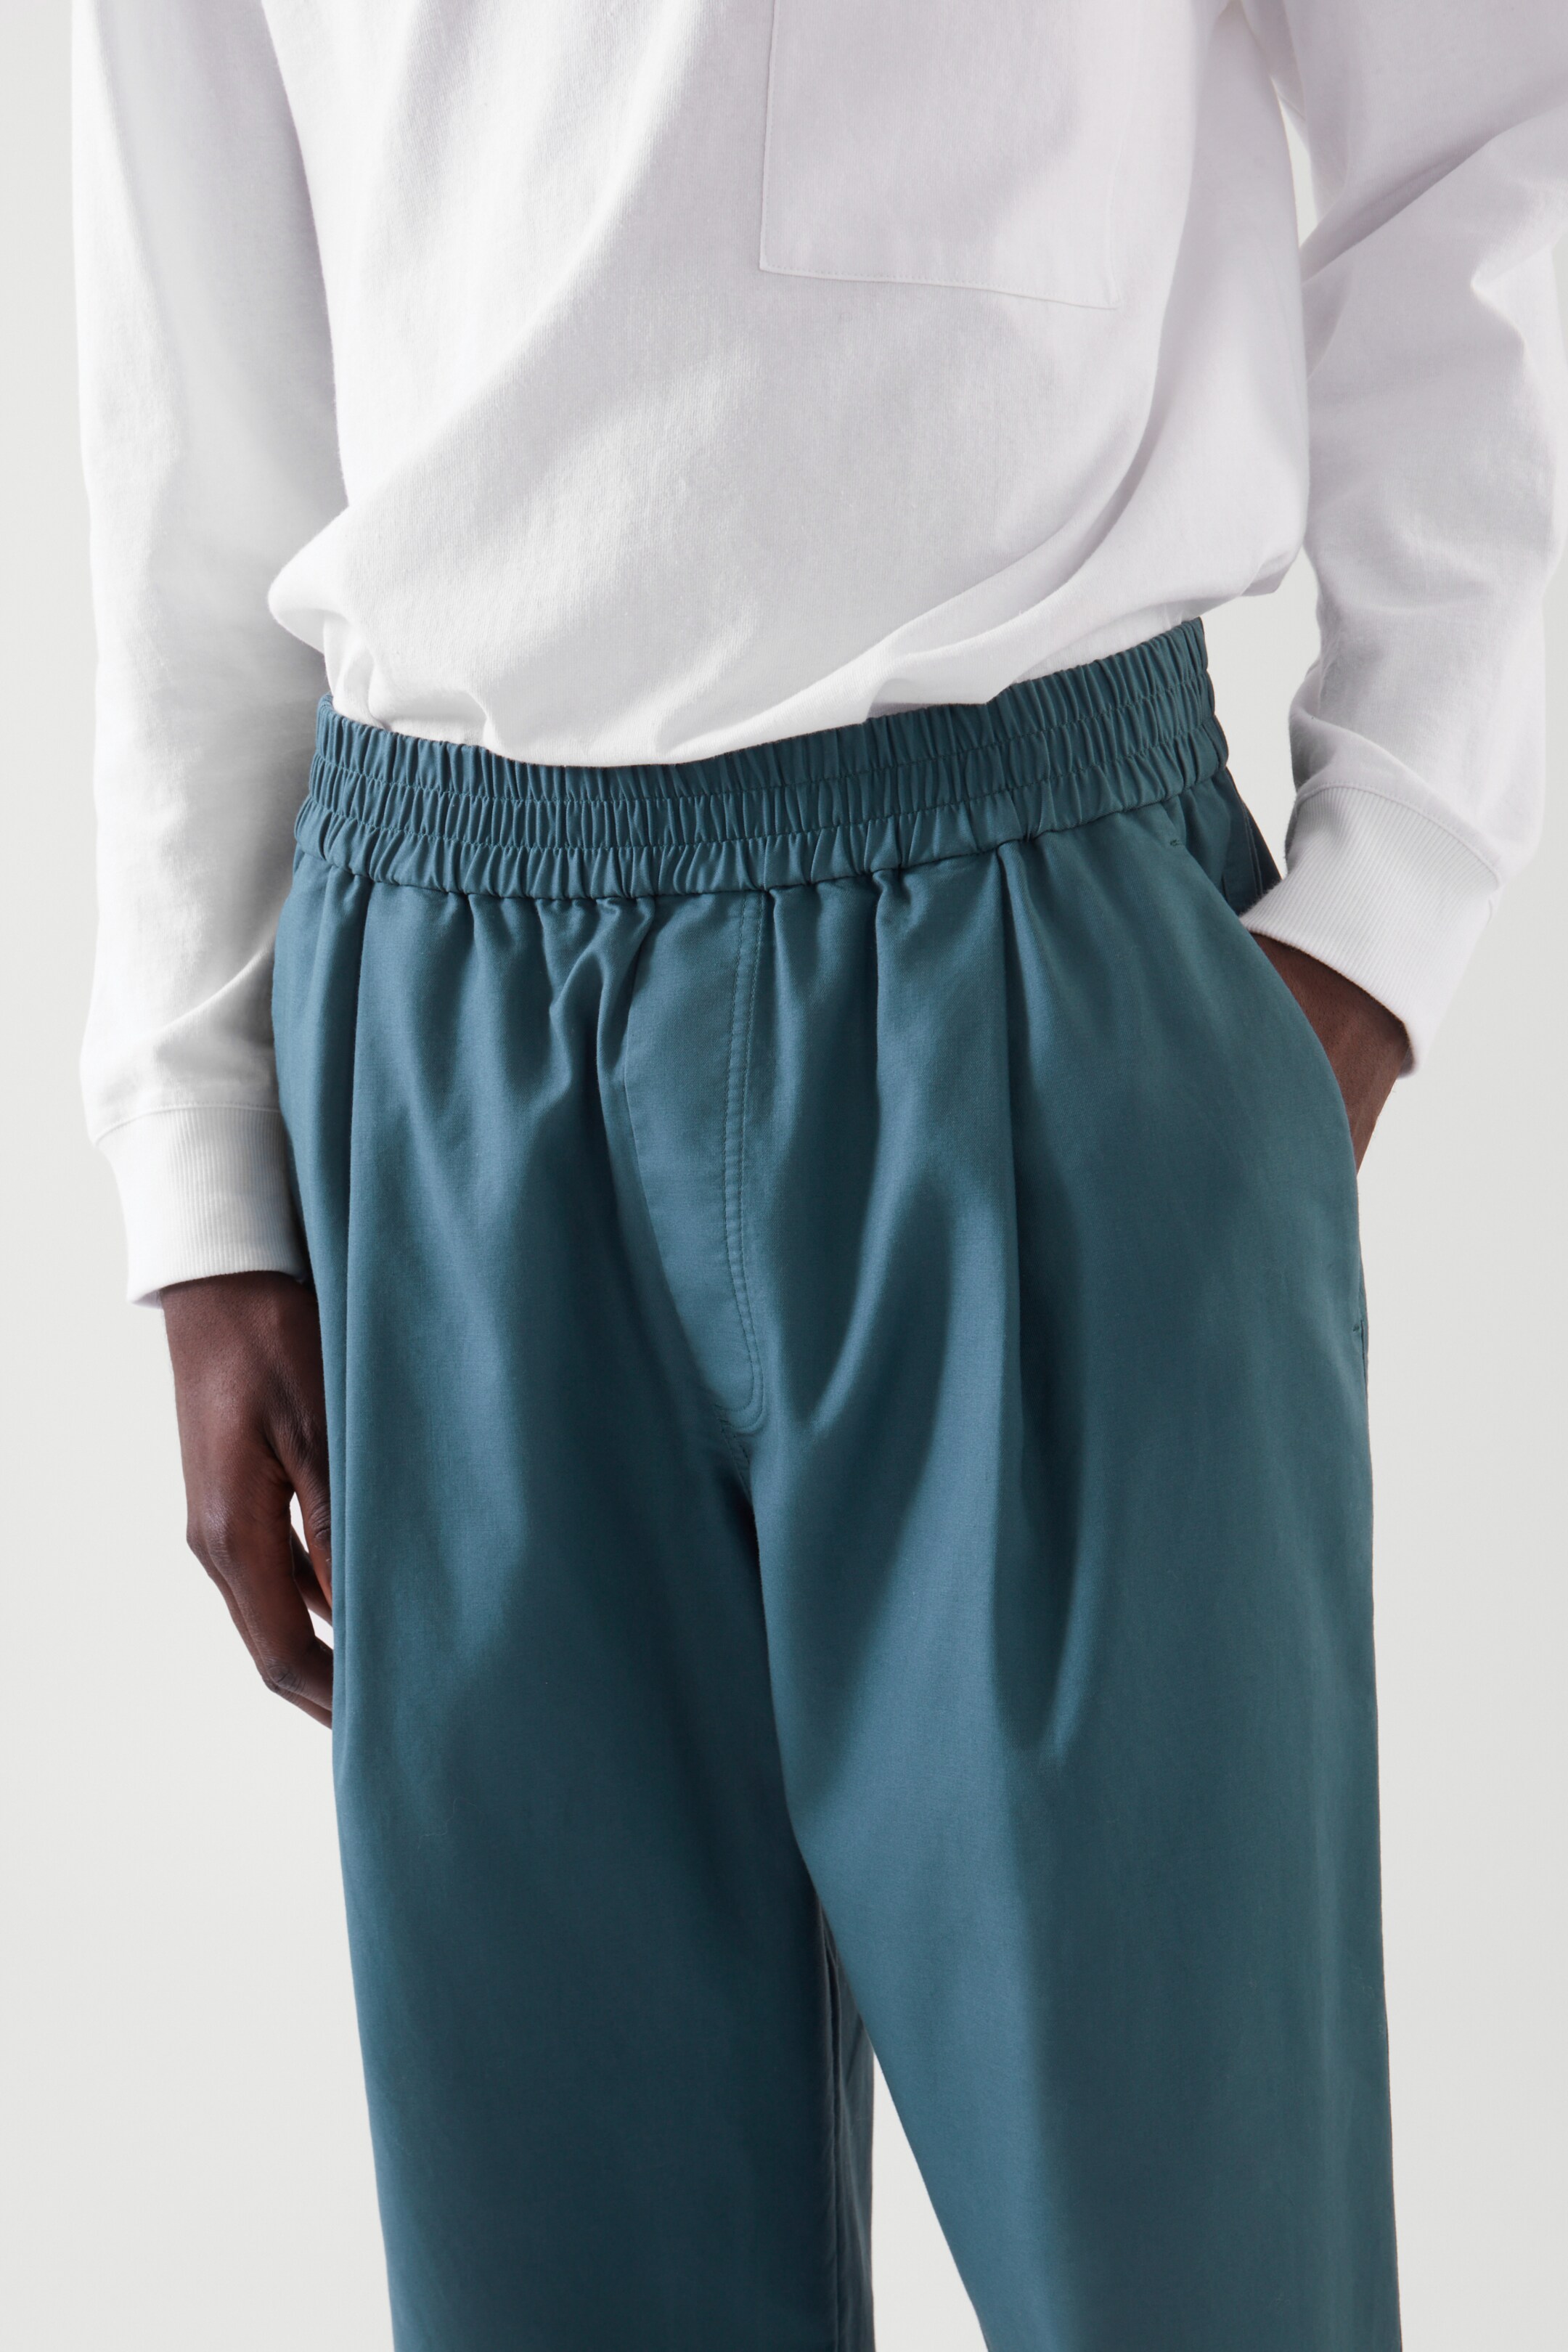 Bottom image of cos OVERSIZED-FIT ELASTICATED PANTS in TEAL